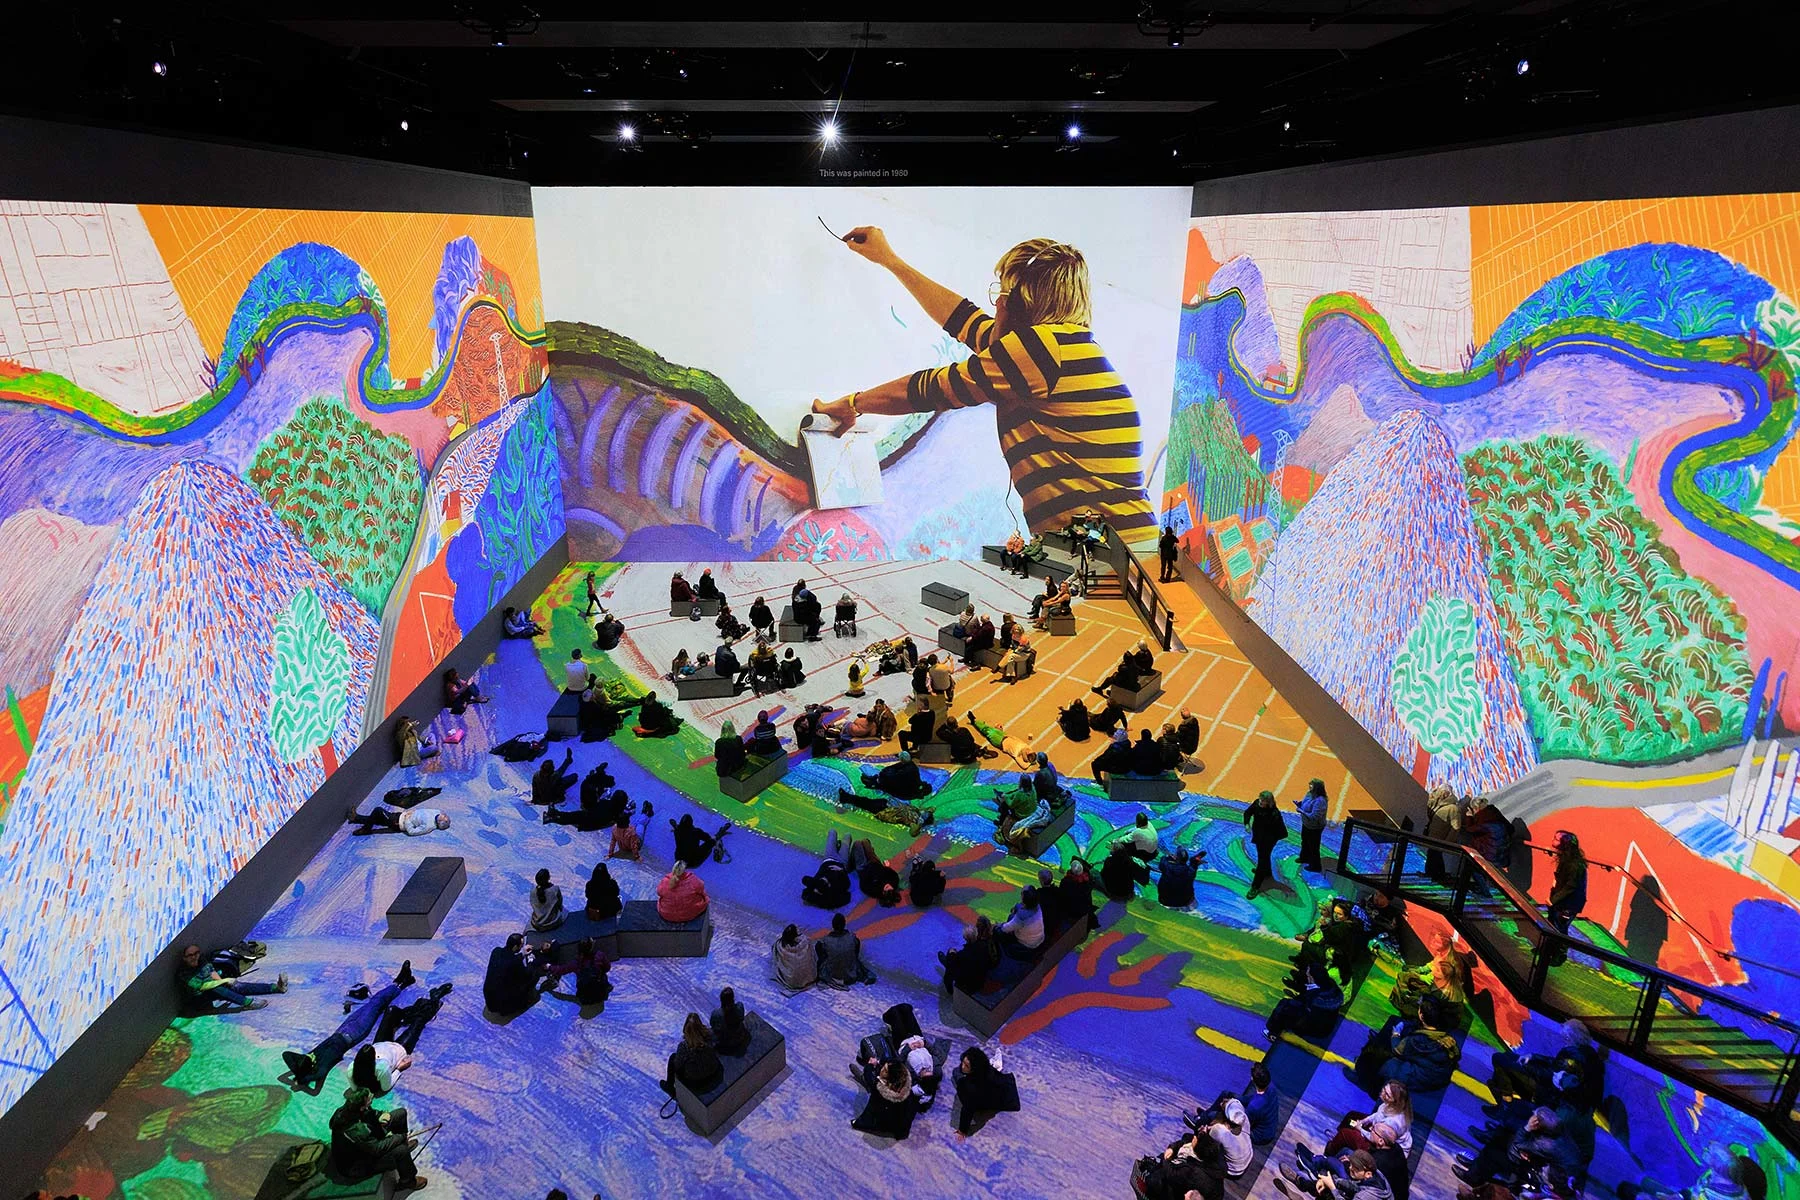 People sitting in a cavernous room with projections of paintings on the walls and floor, and a large screen showing the artist David Hockney at work